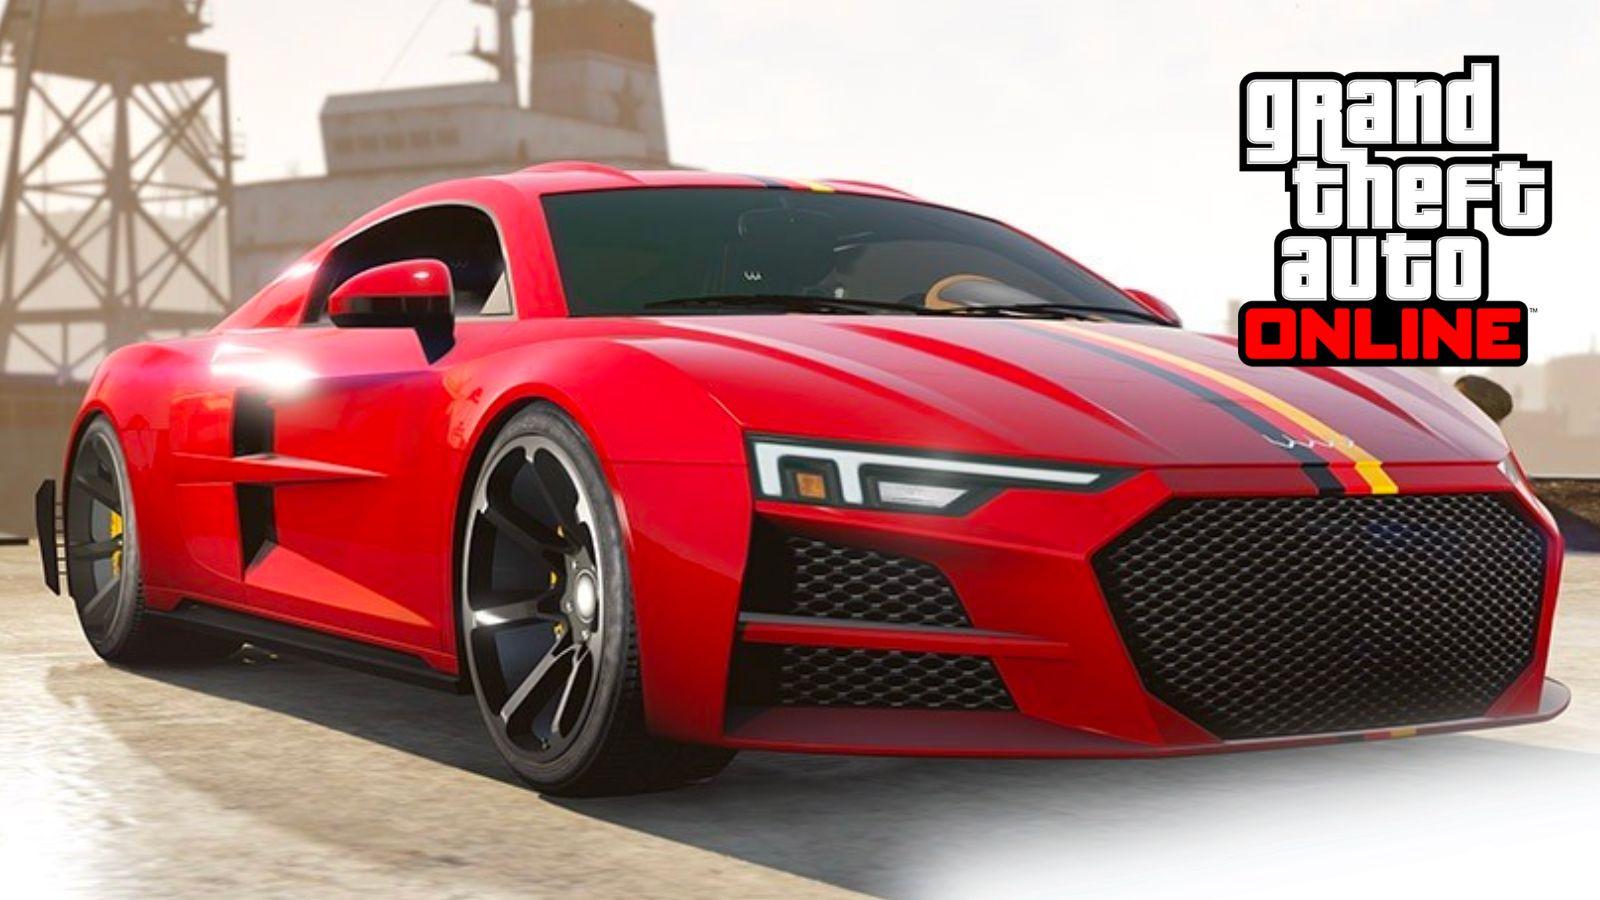 Massive GTA Online update adds five new cars and restores Vice